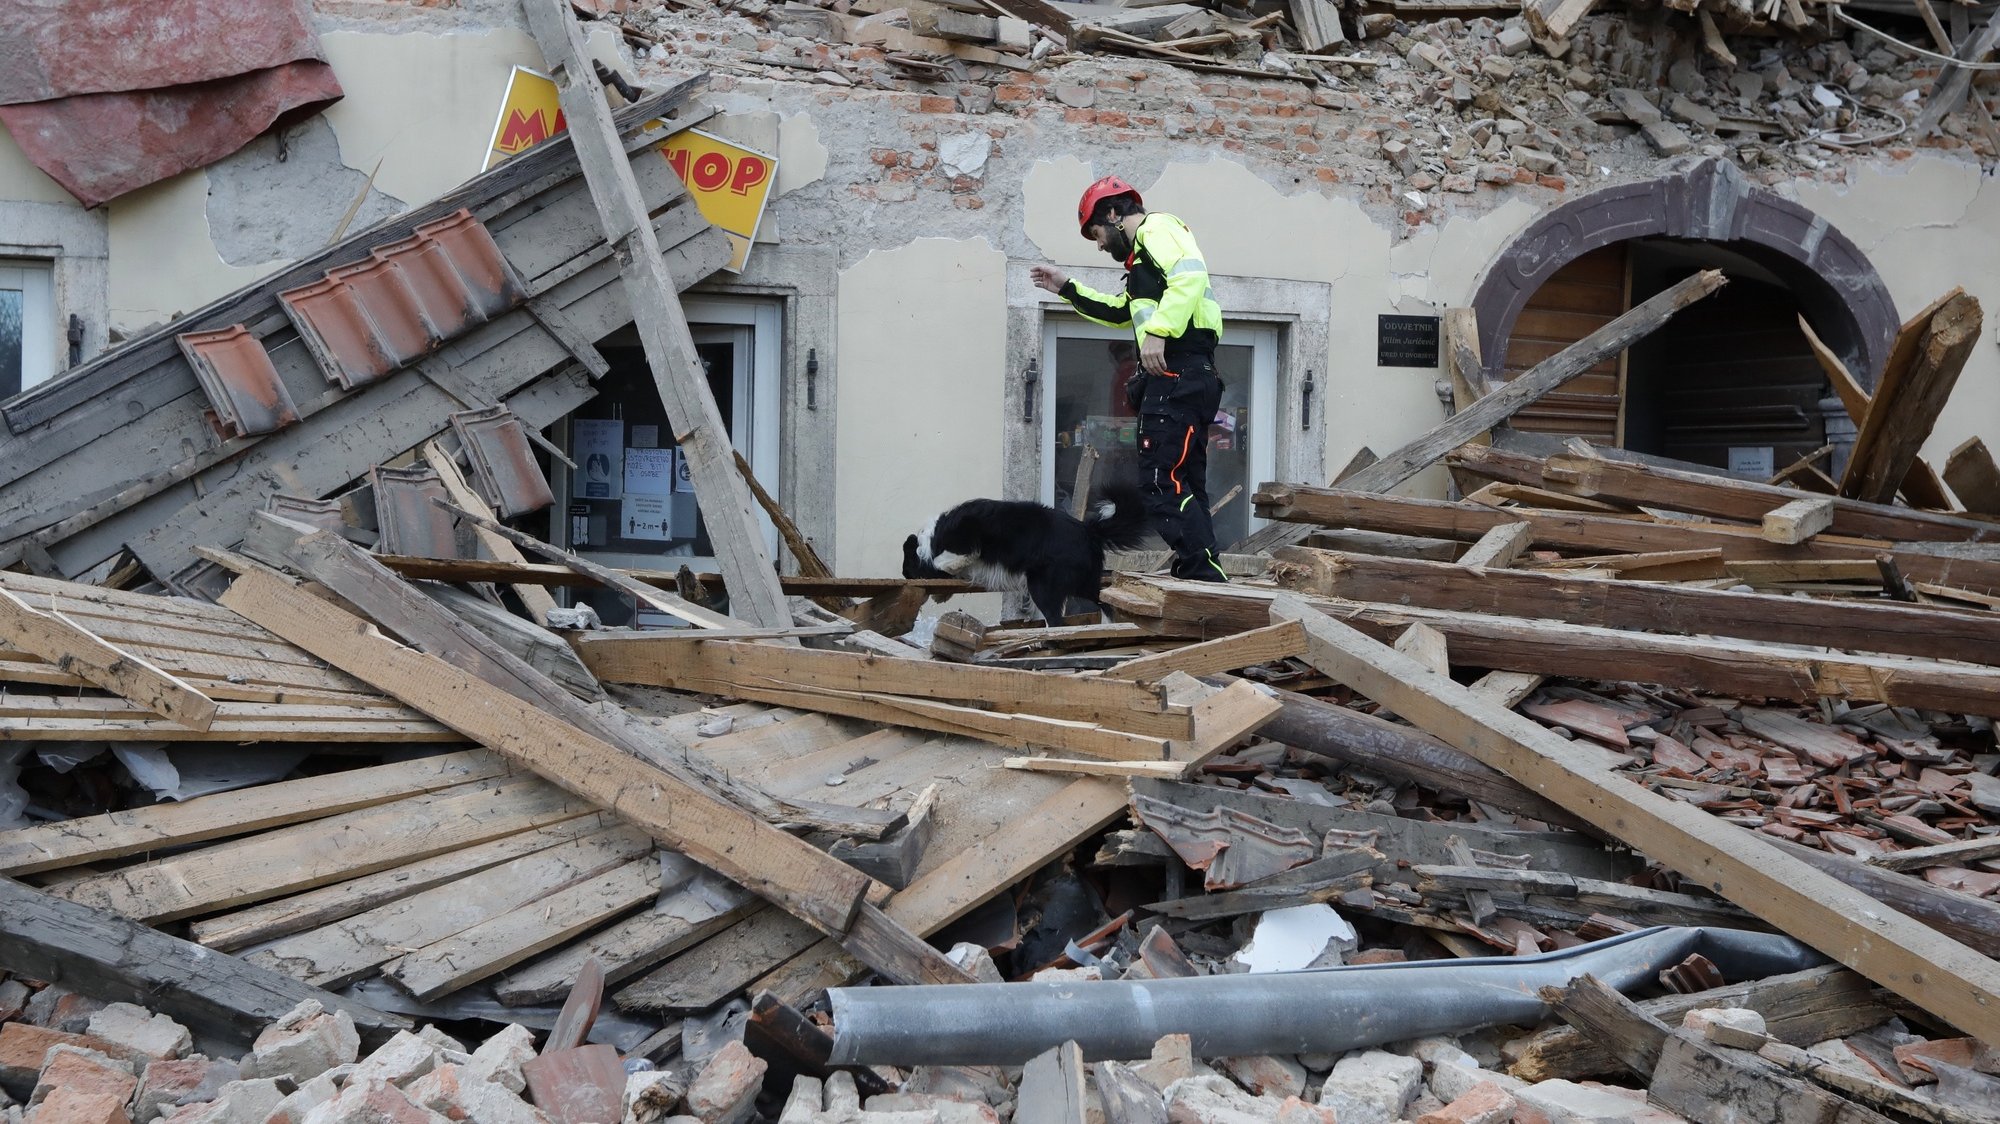 epa08909778 A rescue worker and his dog inspect buildings damaged in an earthquake in Petrinja, Croatia, 29 December 2020. A 6.4 magnitude earthquake struck around 3km west south west of the town with reports of many injuries and at least one death.  EPA/ANTONIO BAT